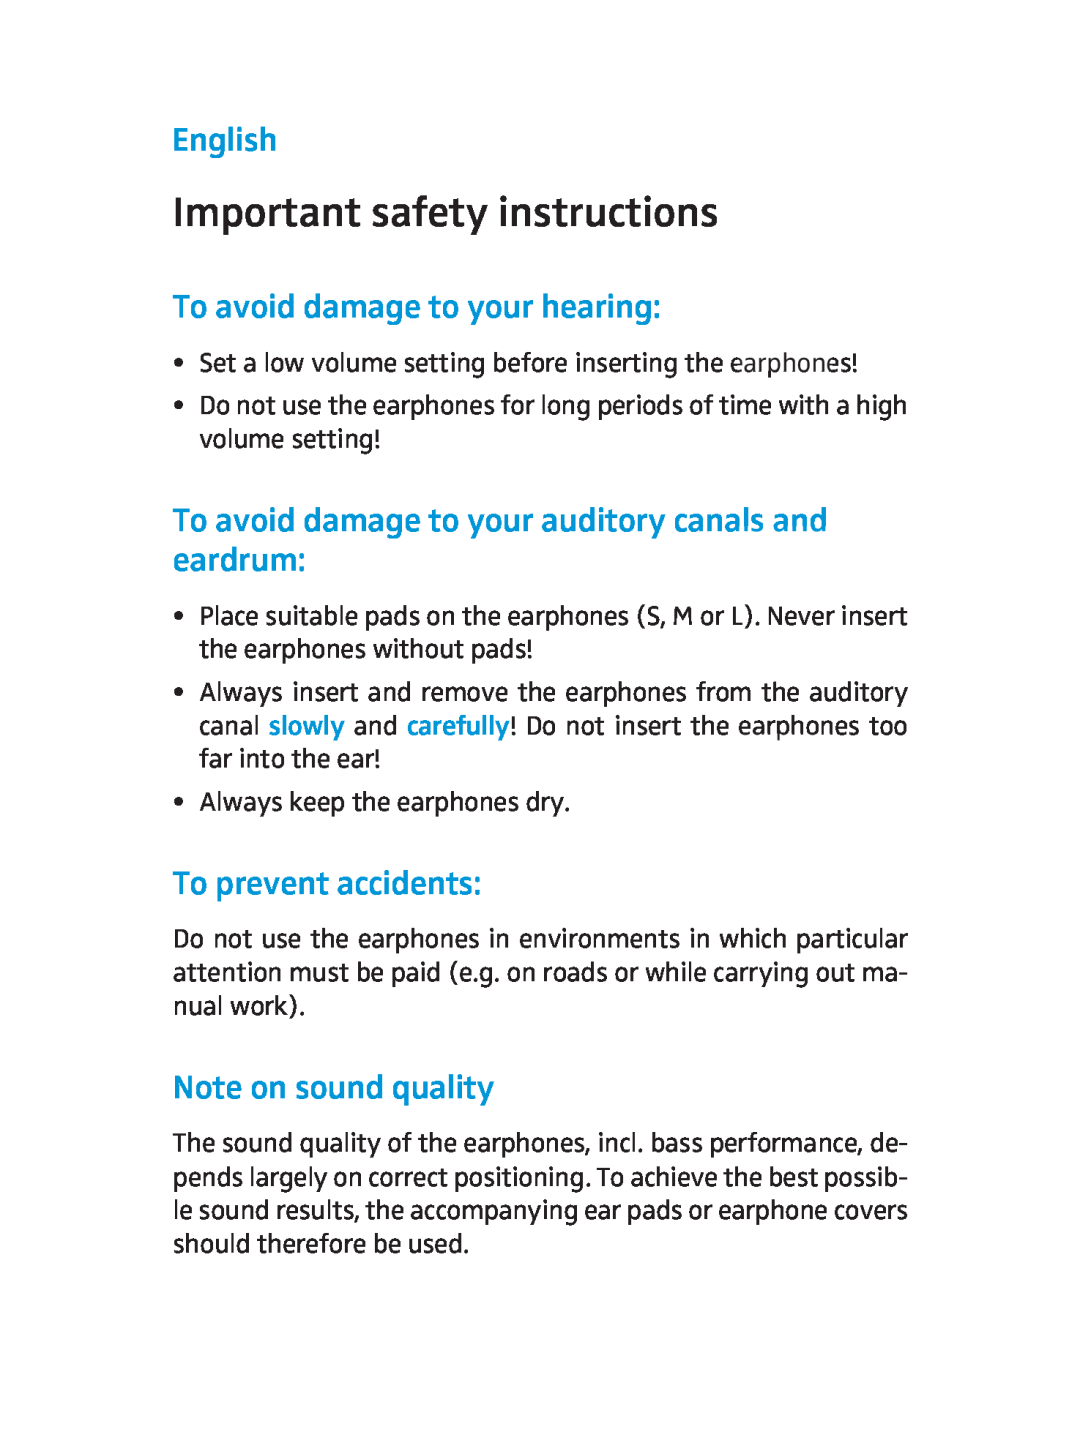 Sennheiser CX 400 manual Important safety instructions, English, To avoid damage to your hearing, To prevent accidents 